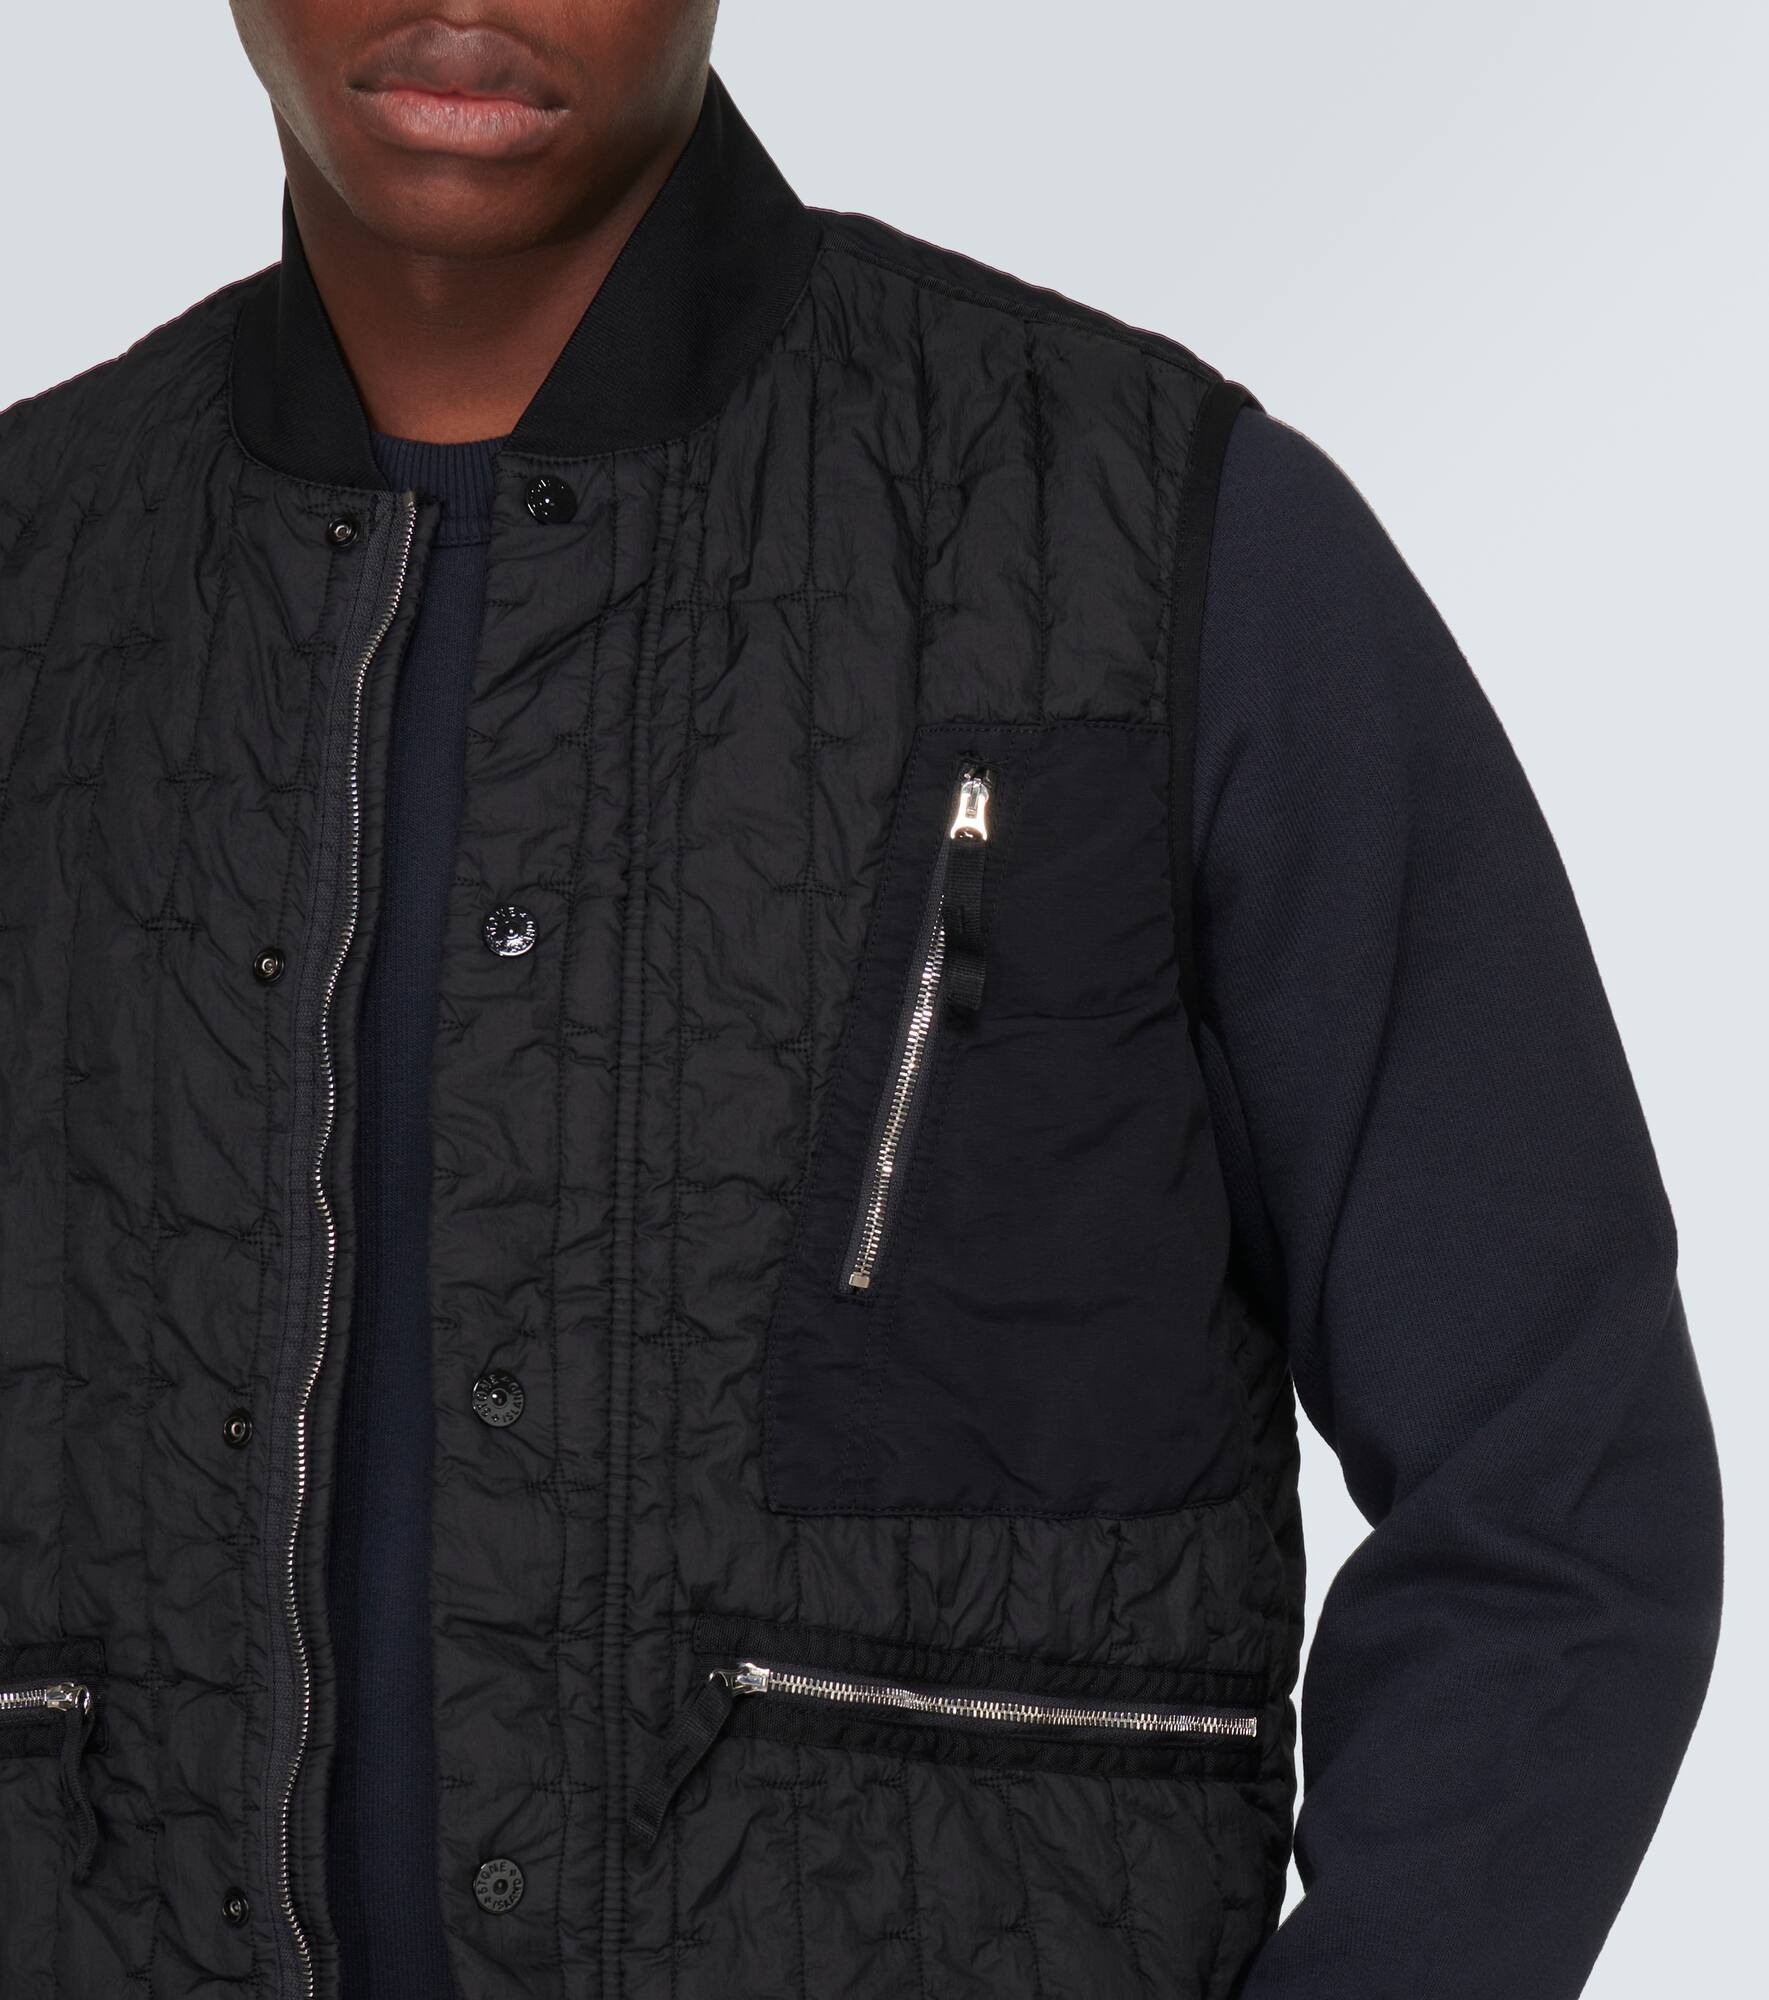 Compass quilted vest - 5